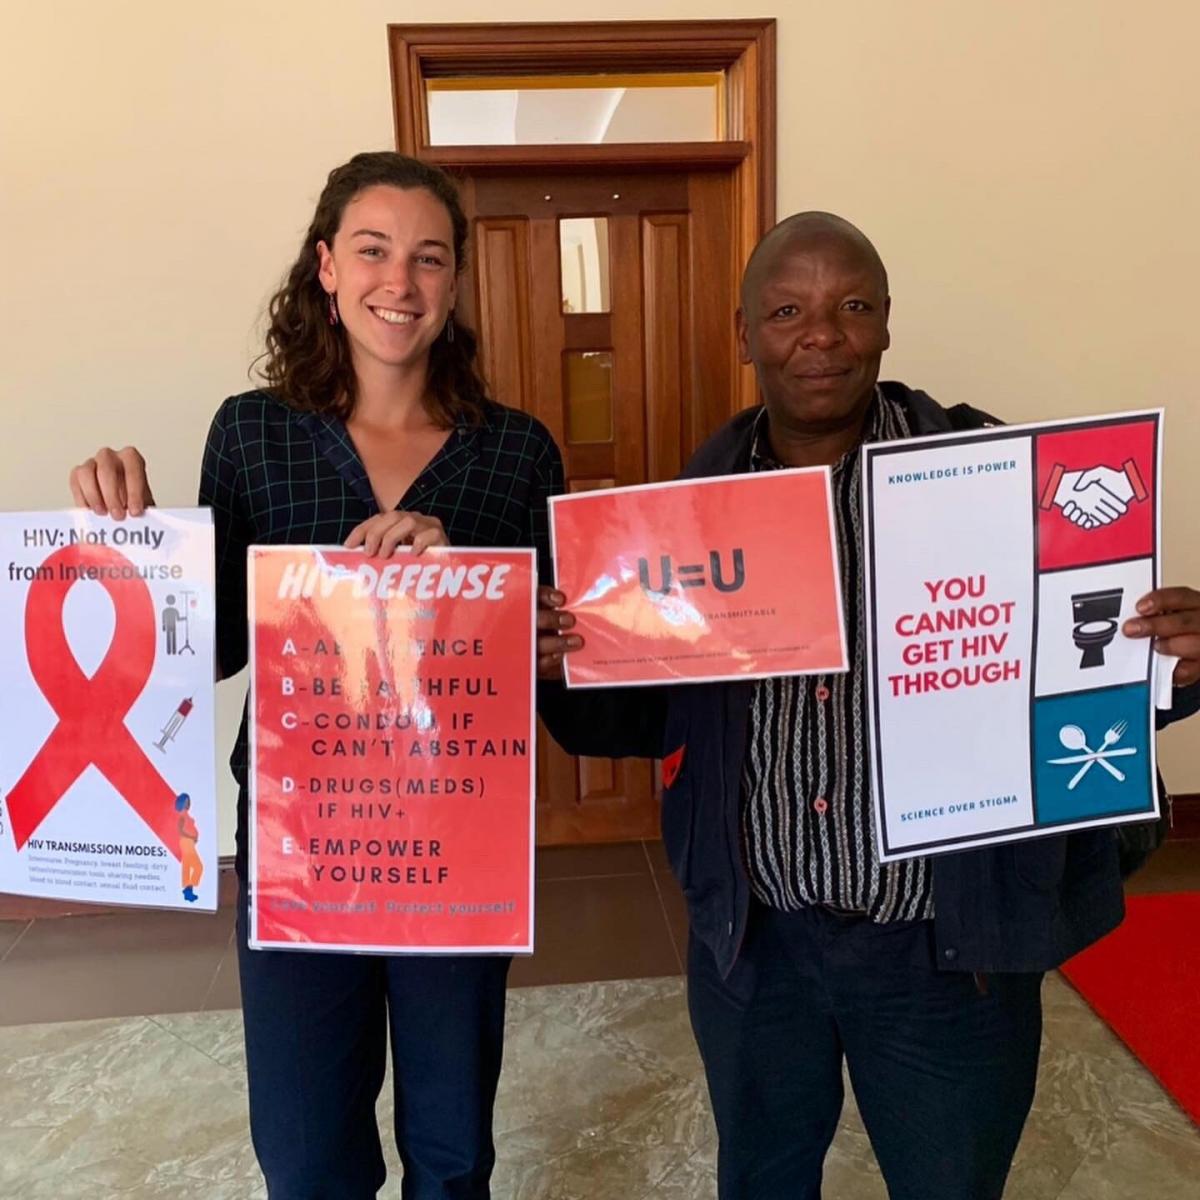 Alexis Anderson with her HIV-education posters